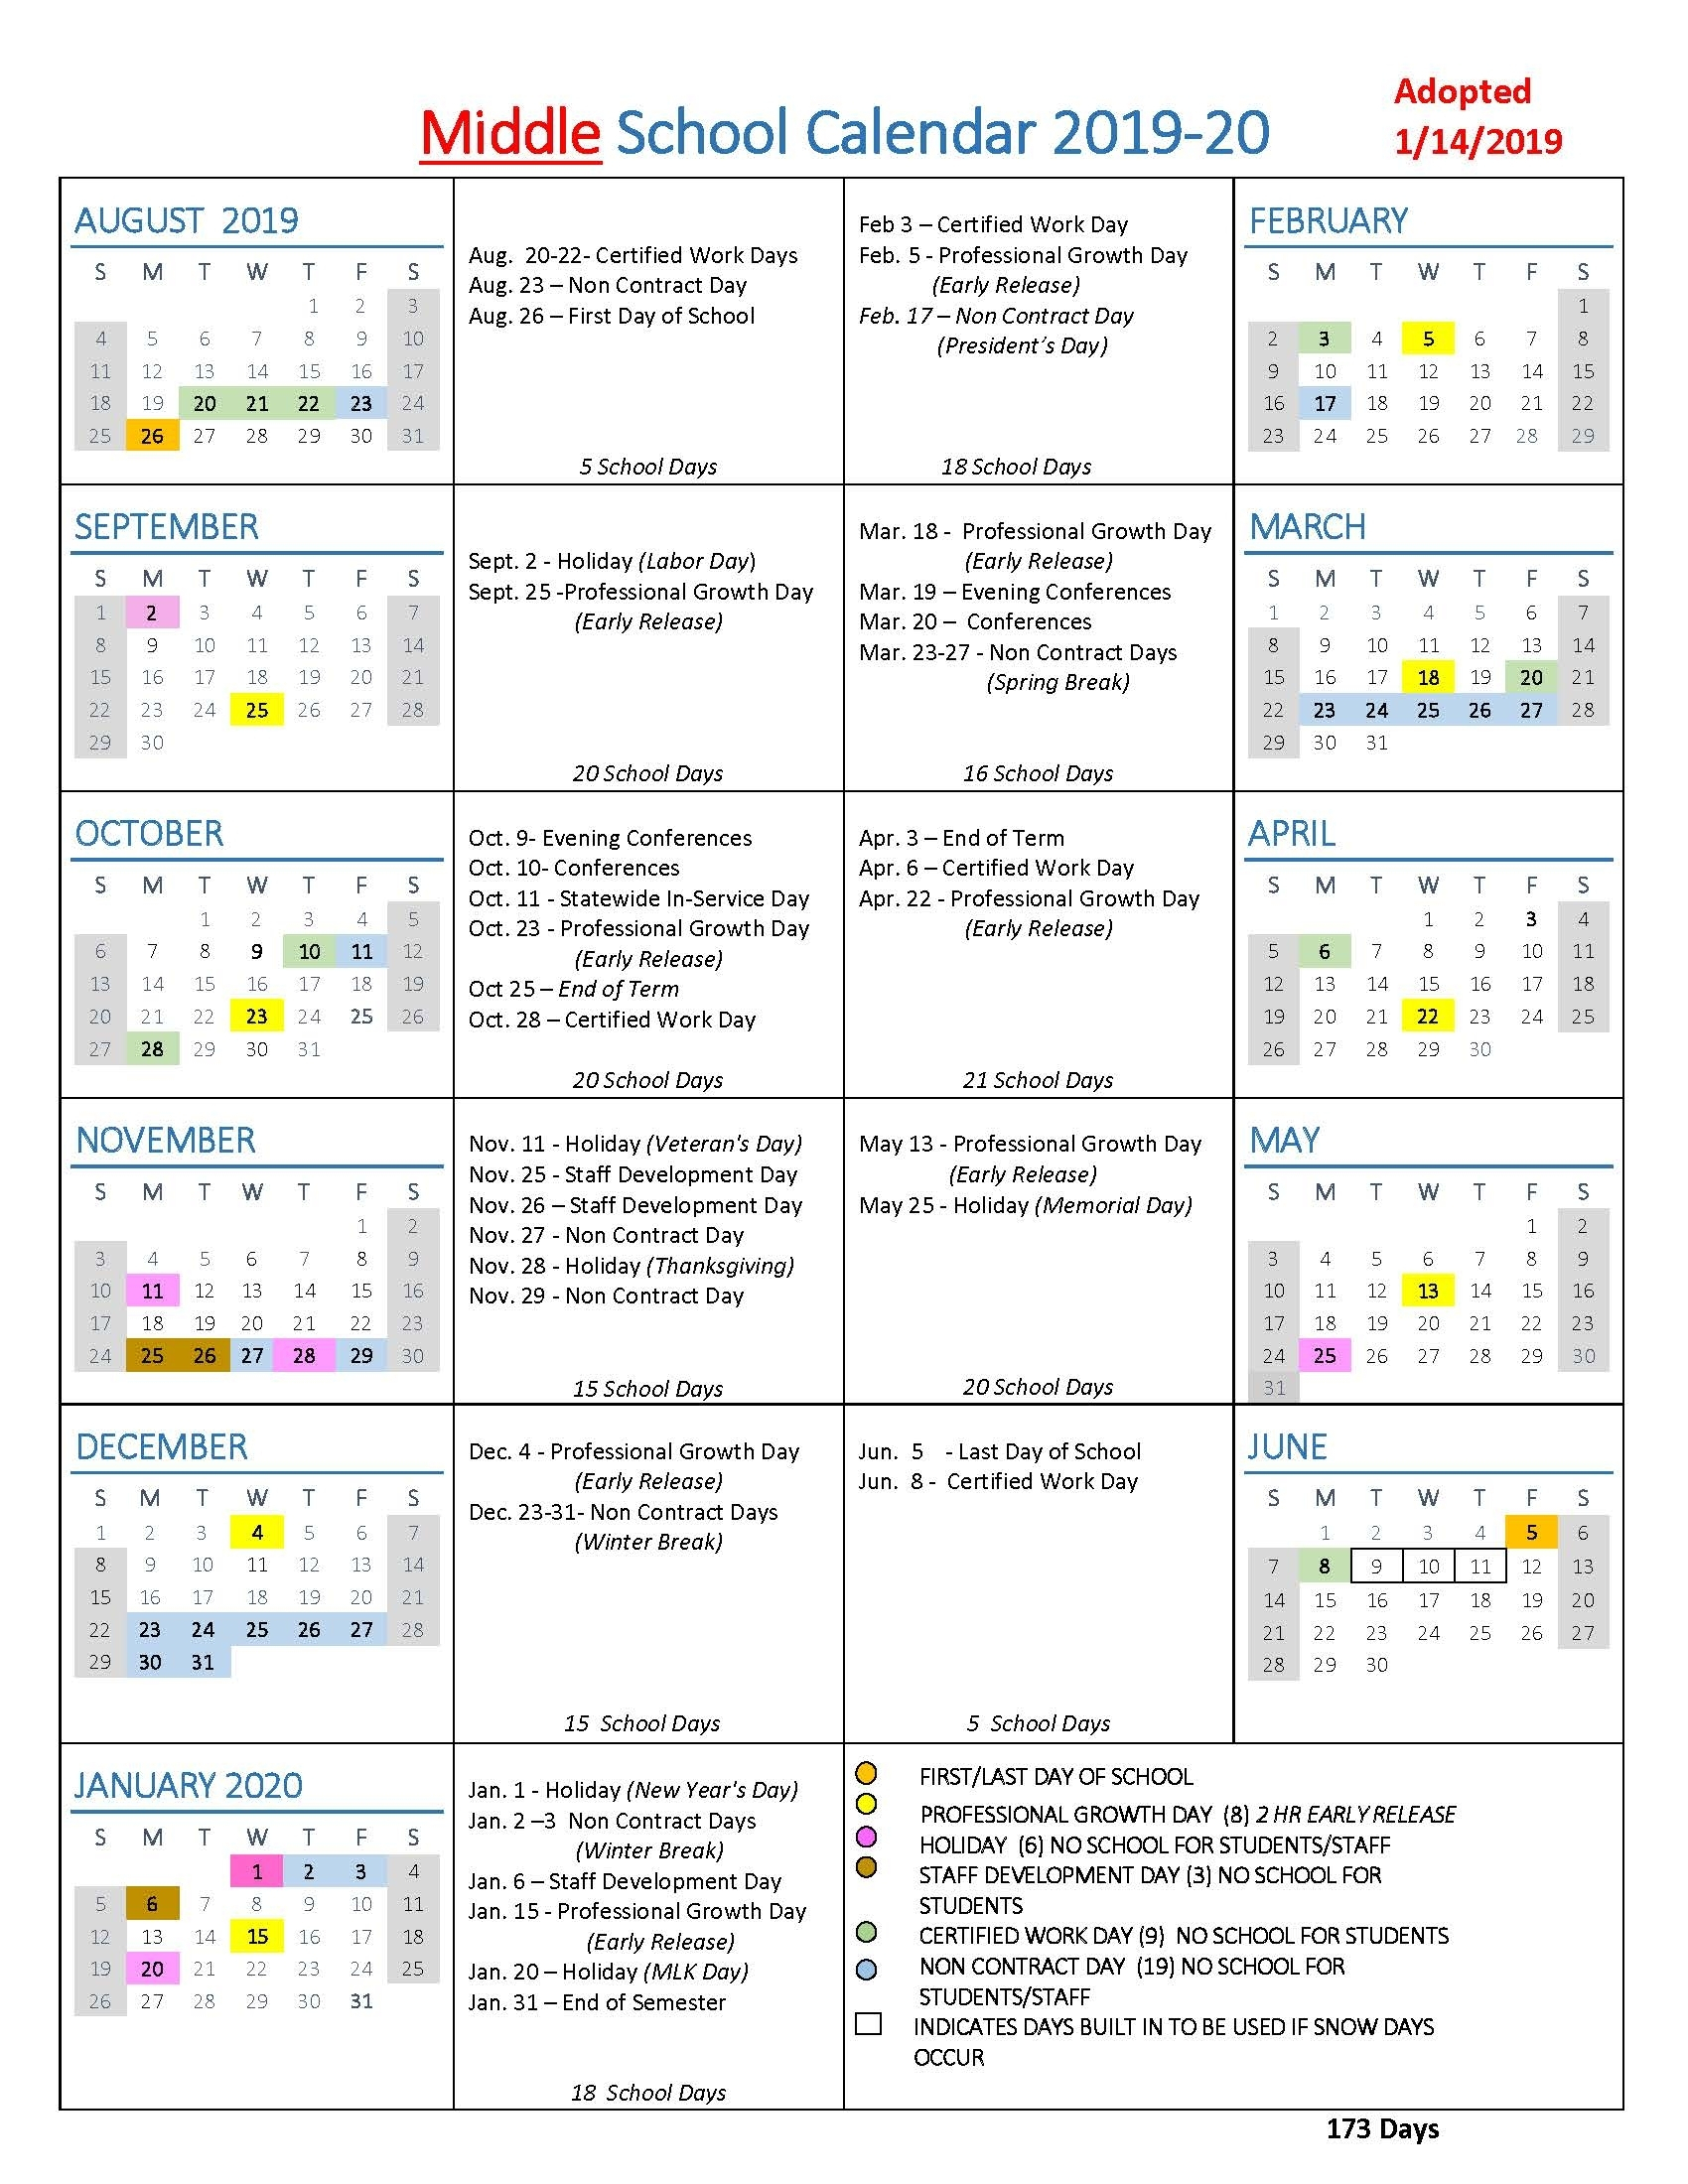 Calendar With All The Special Days In 2020 - Calendar